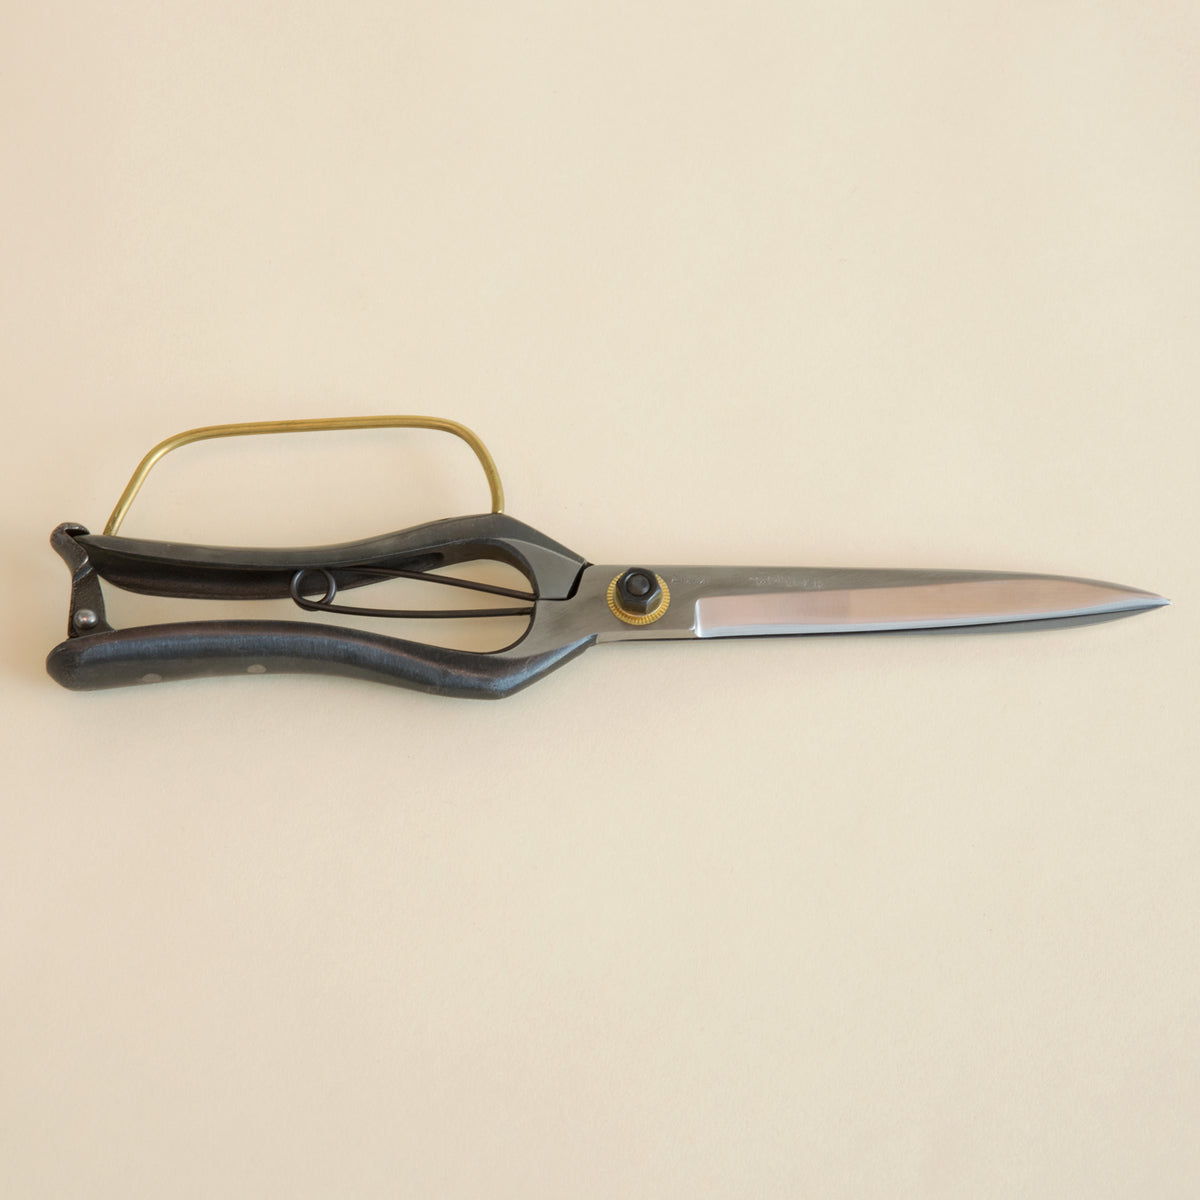 Landscaping Shears - 267mm